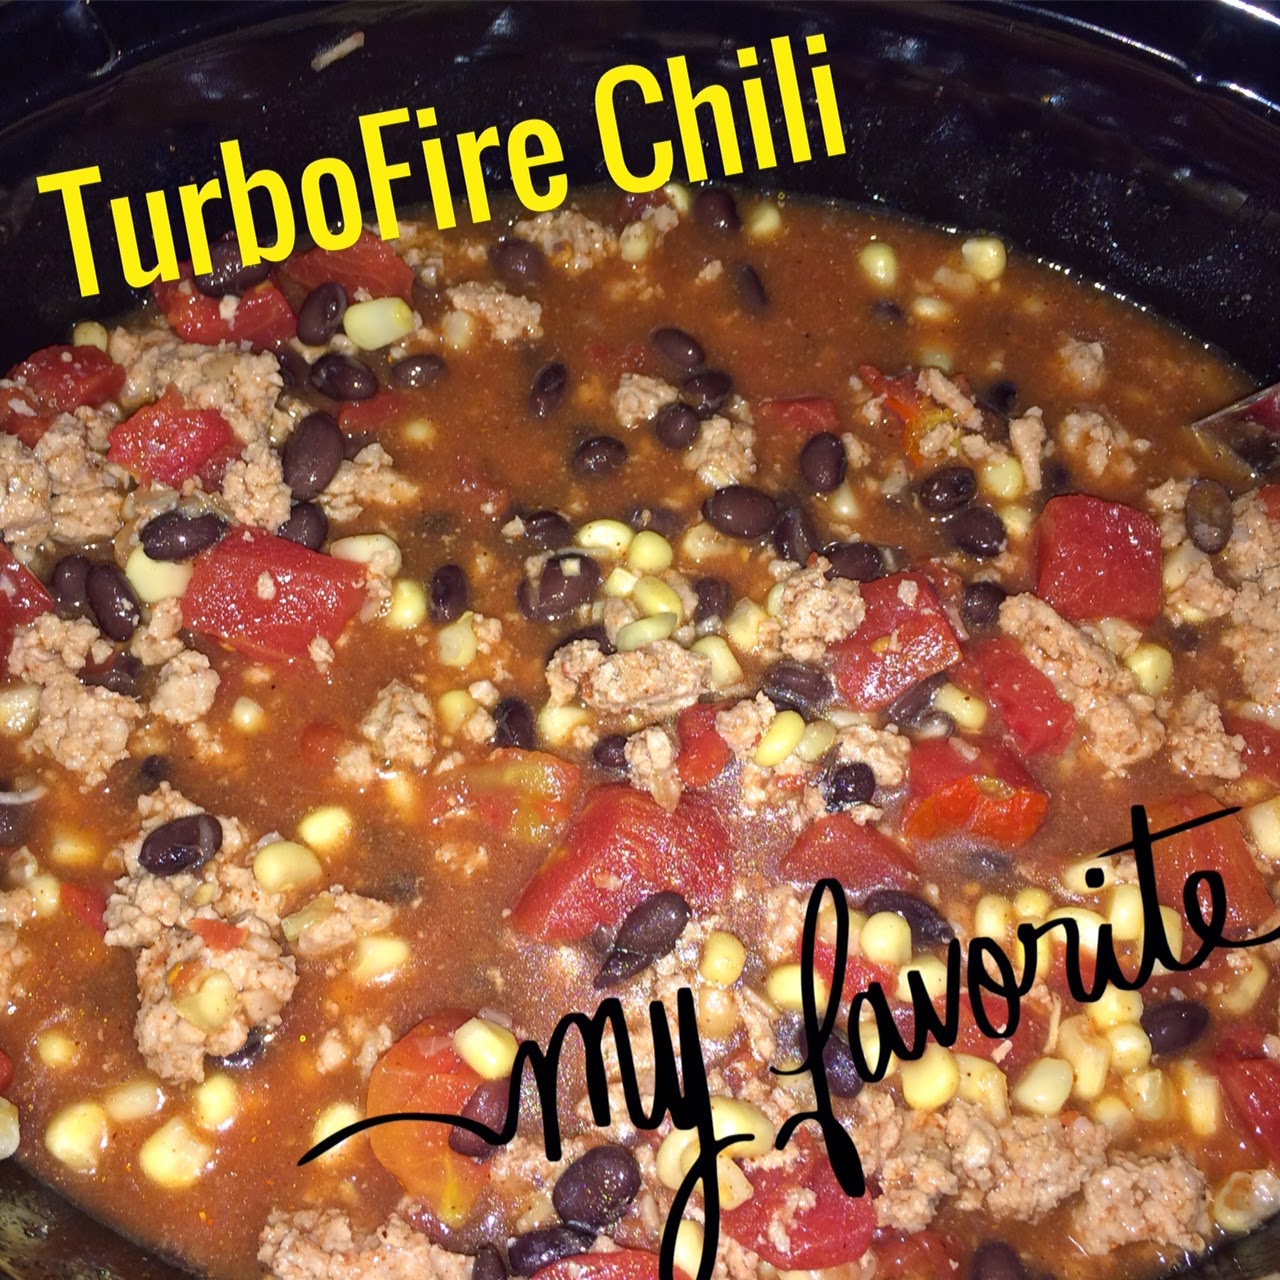 Turbo Fire Chili, 6 Tips for a Healthy Super Bowl...Clean Eating Recipes, www.HealthyFitFocused.com 